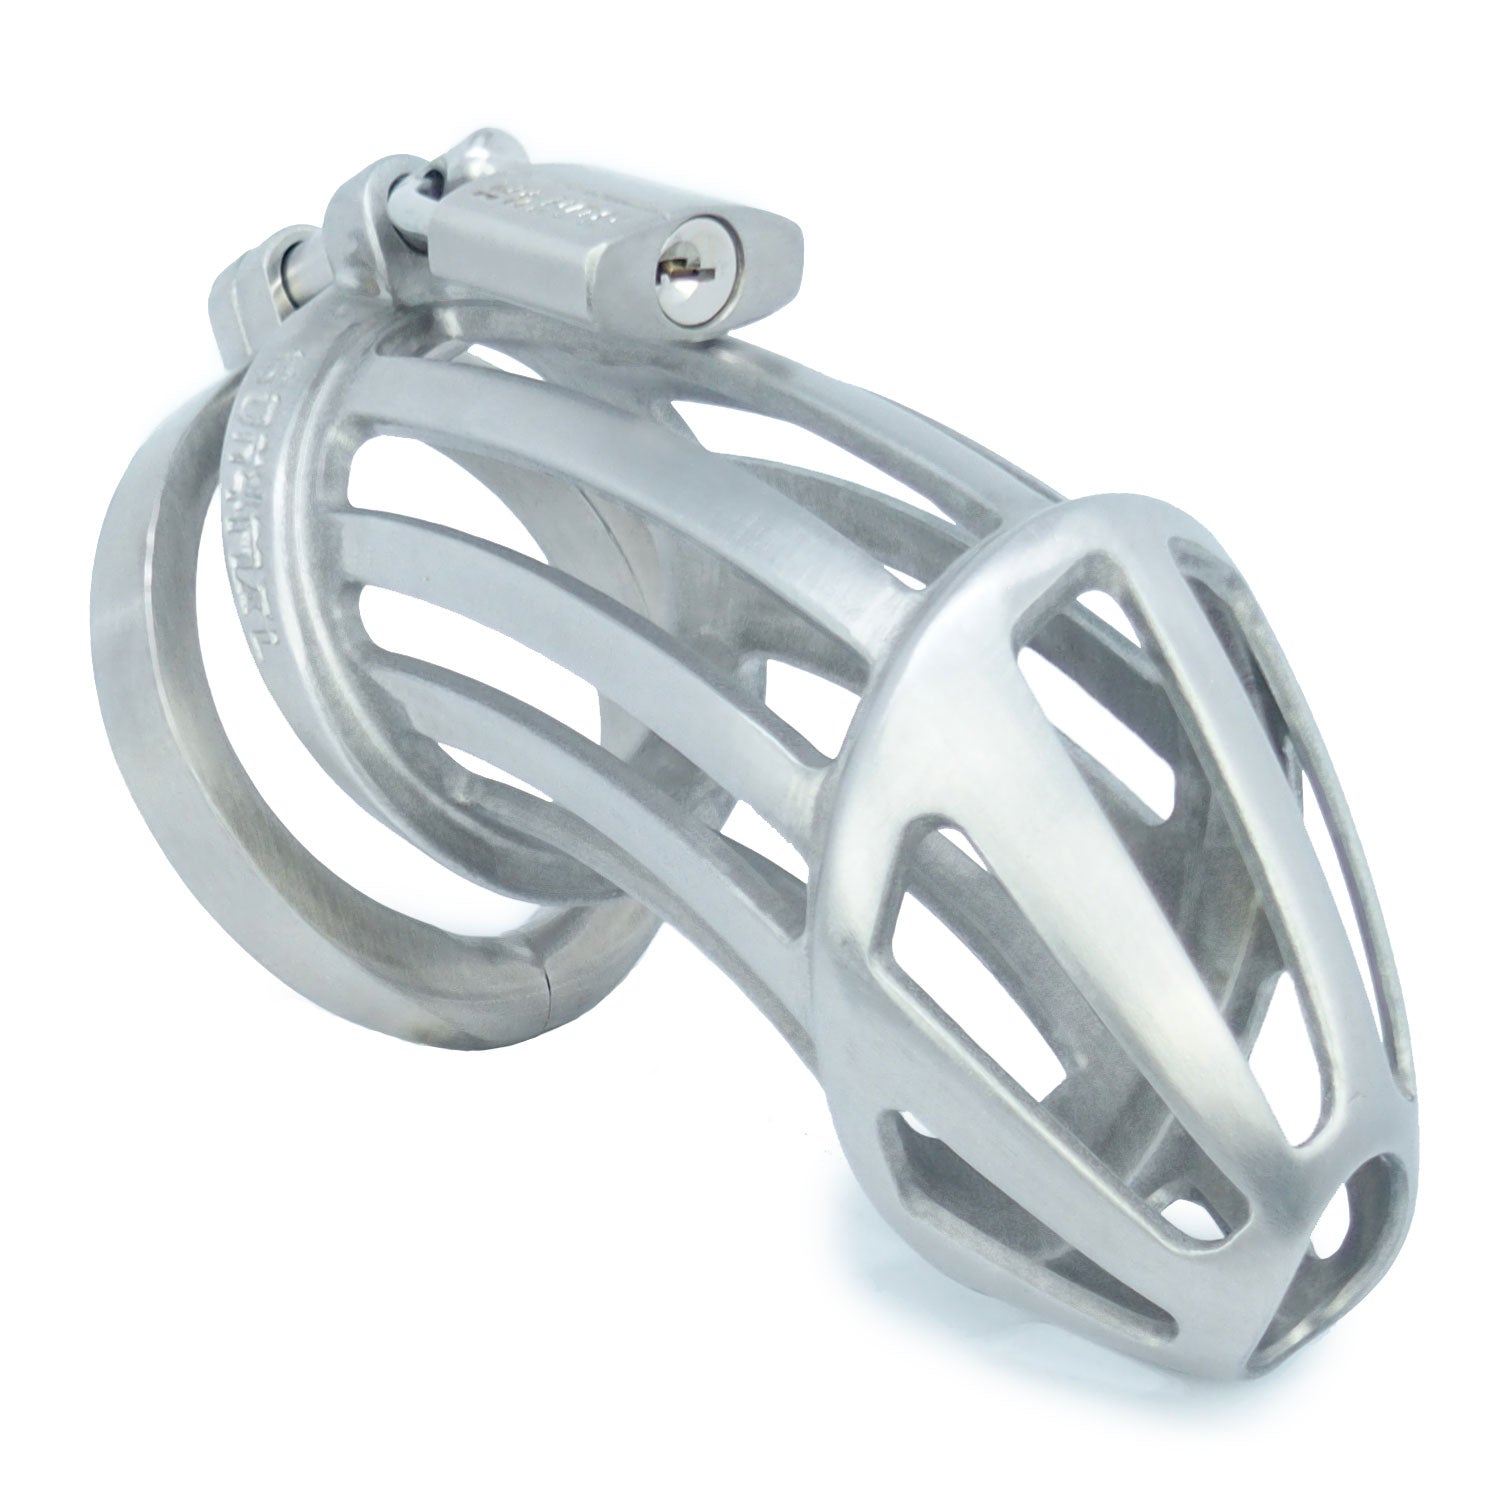 BON4MXL high quality extra large chastity cage in stainless steel – BON 4